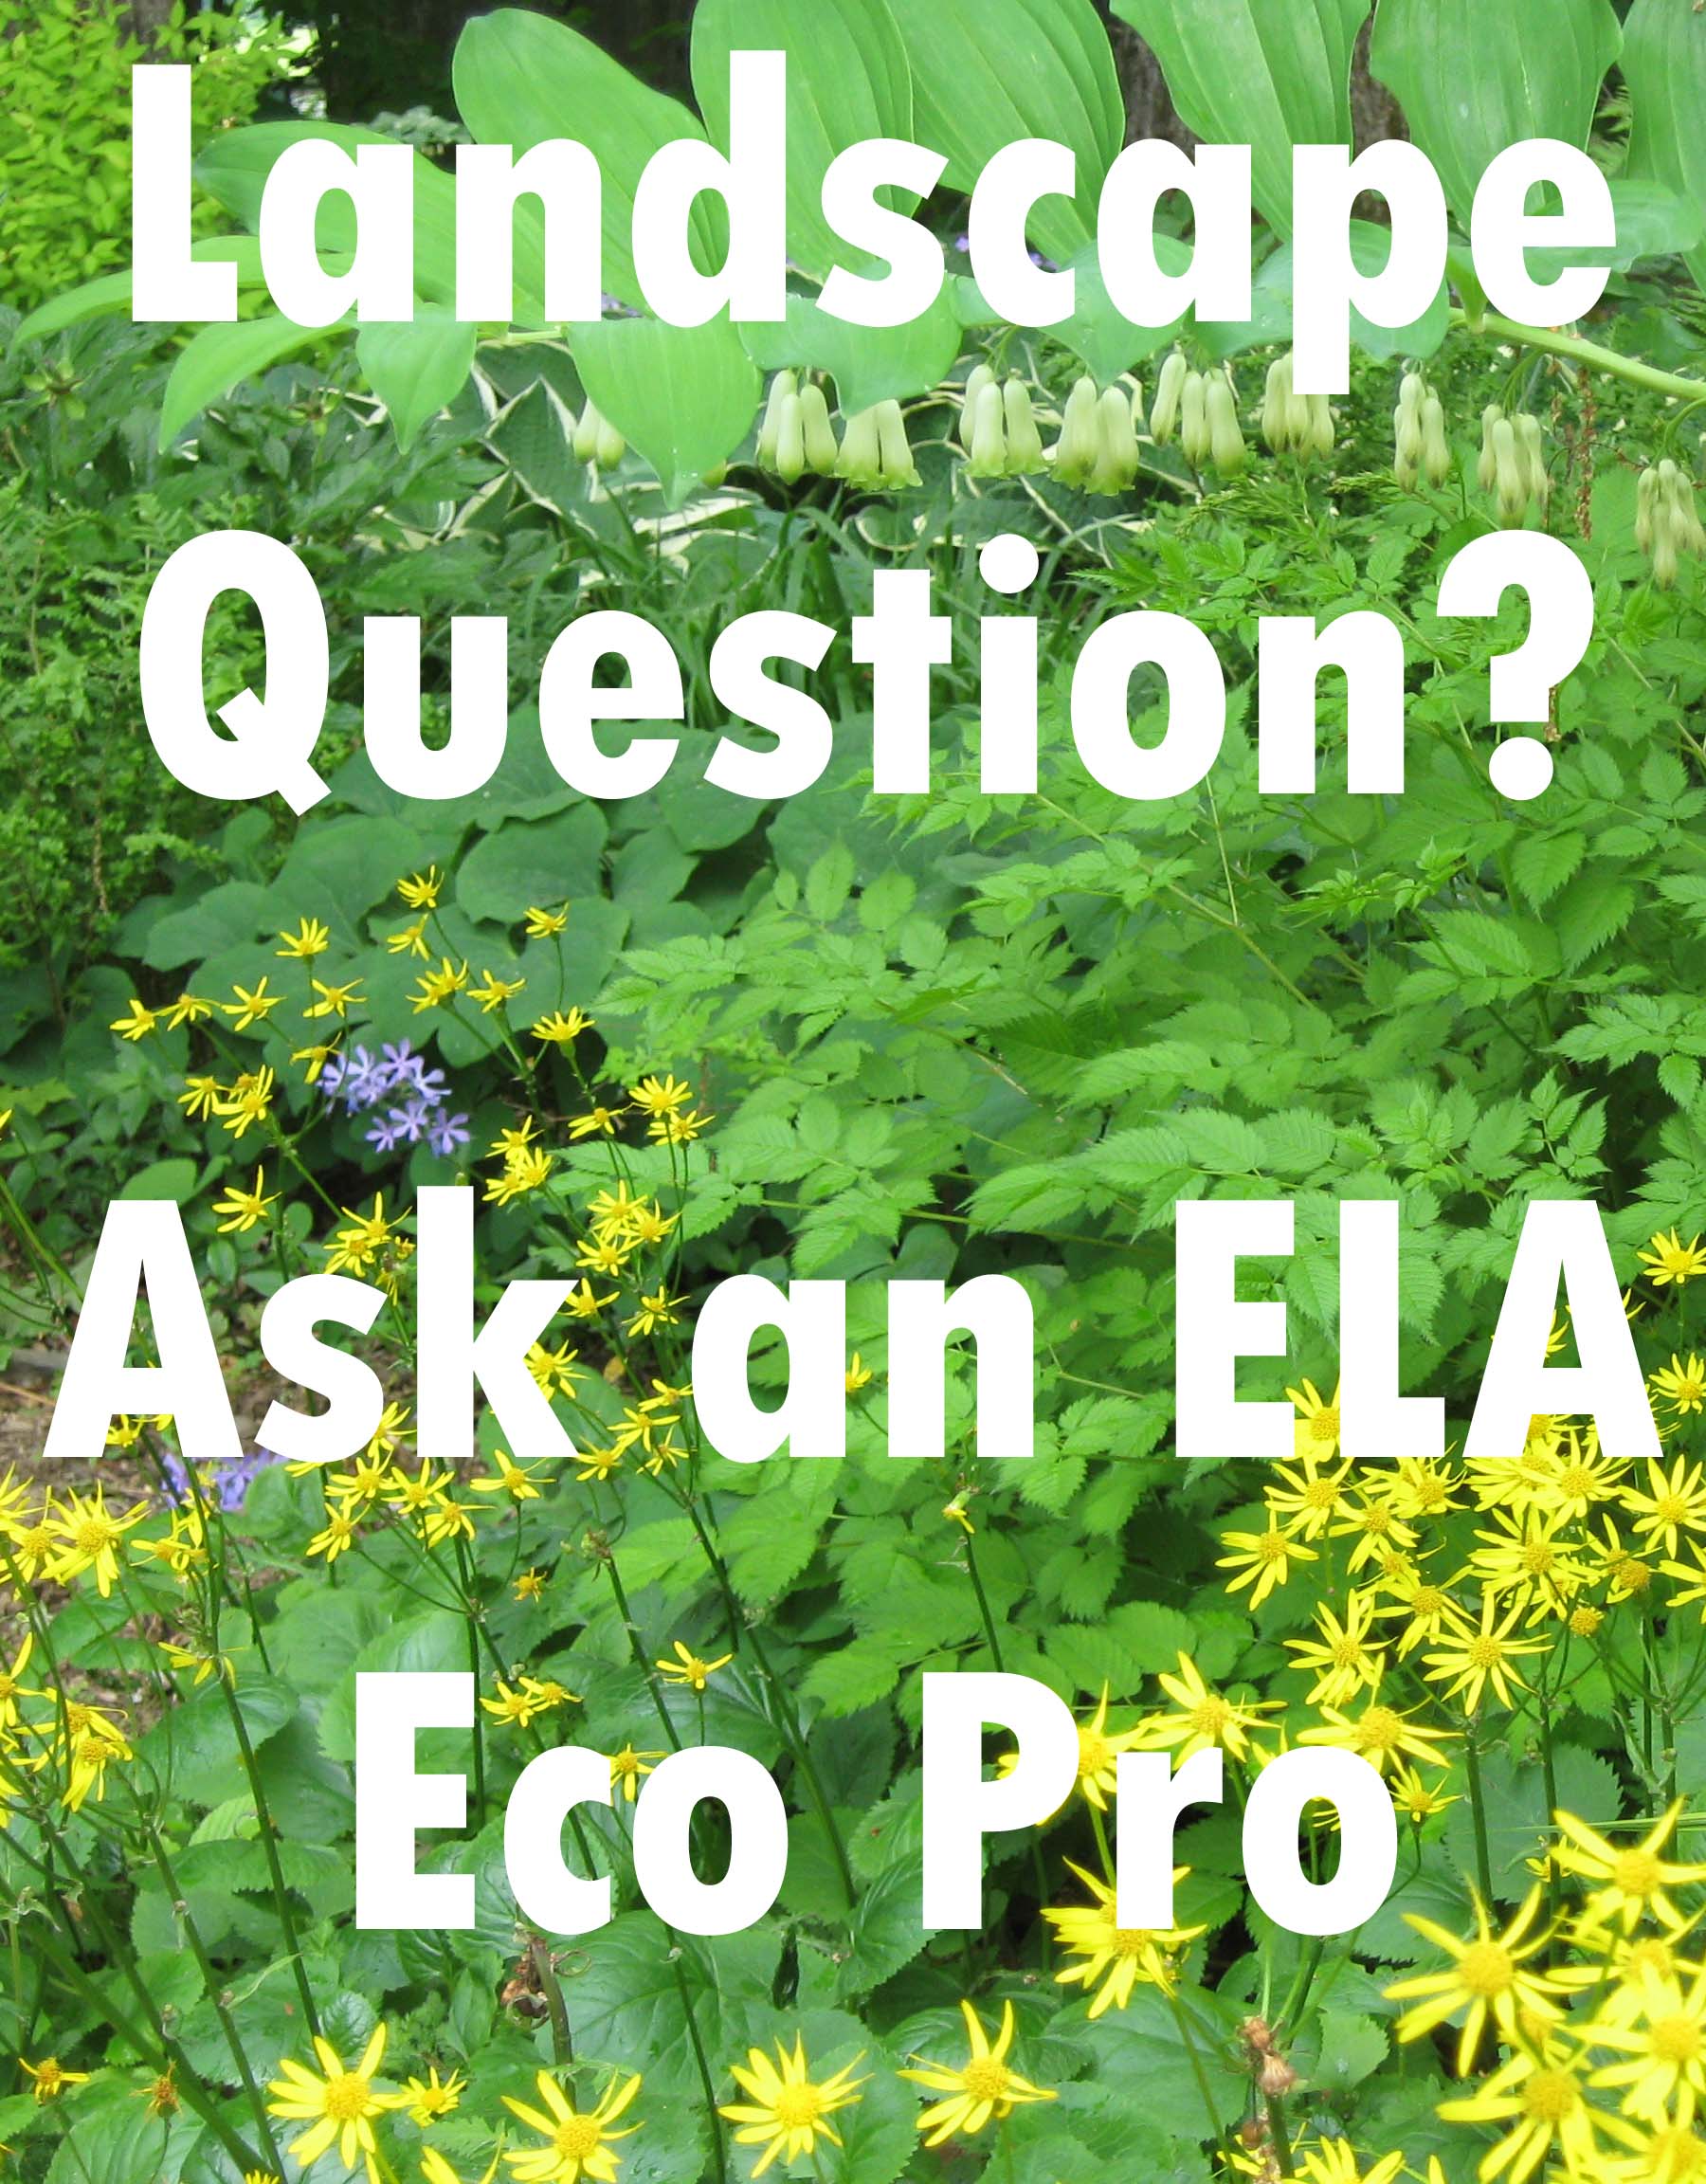 Ask an Eco Pro!